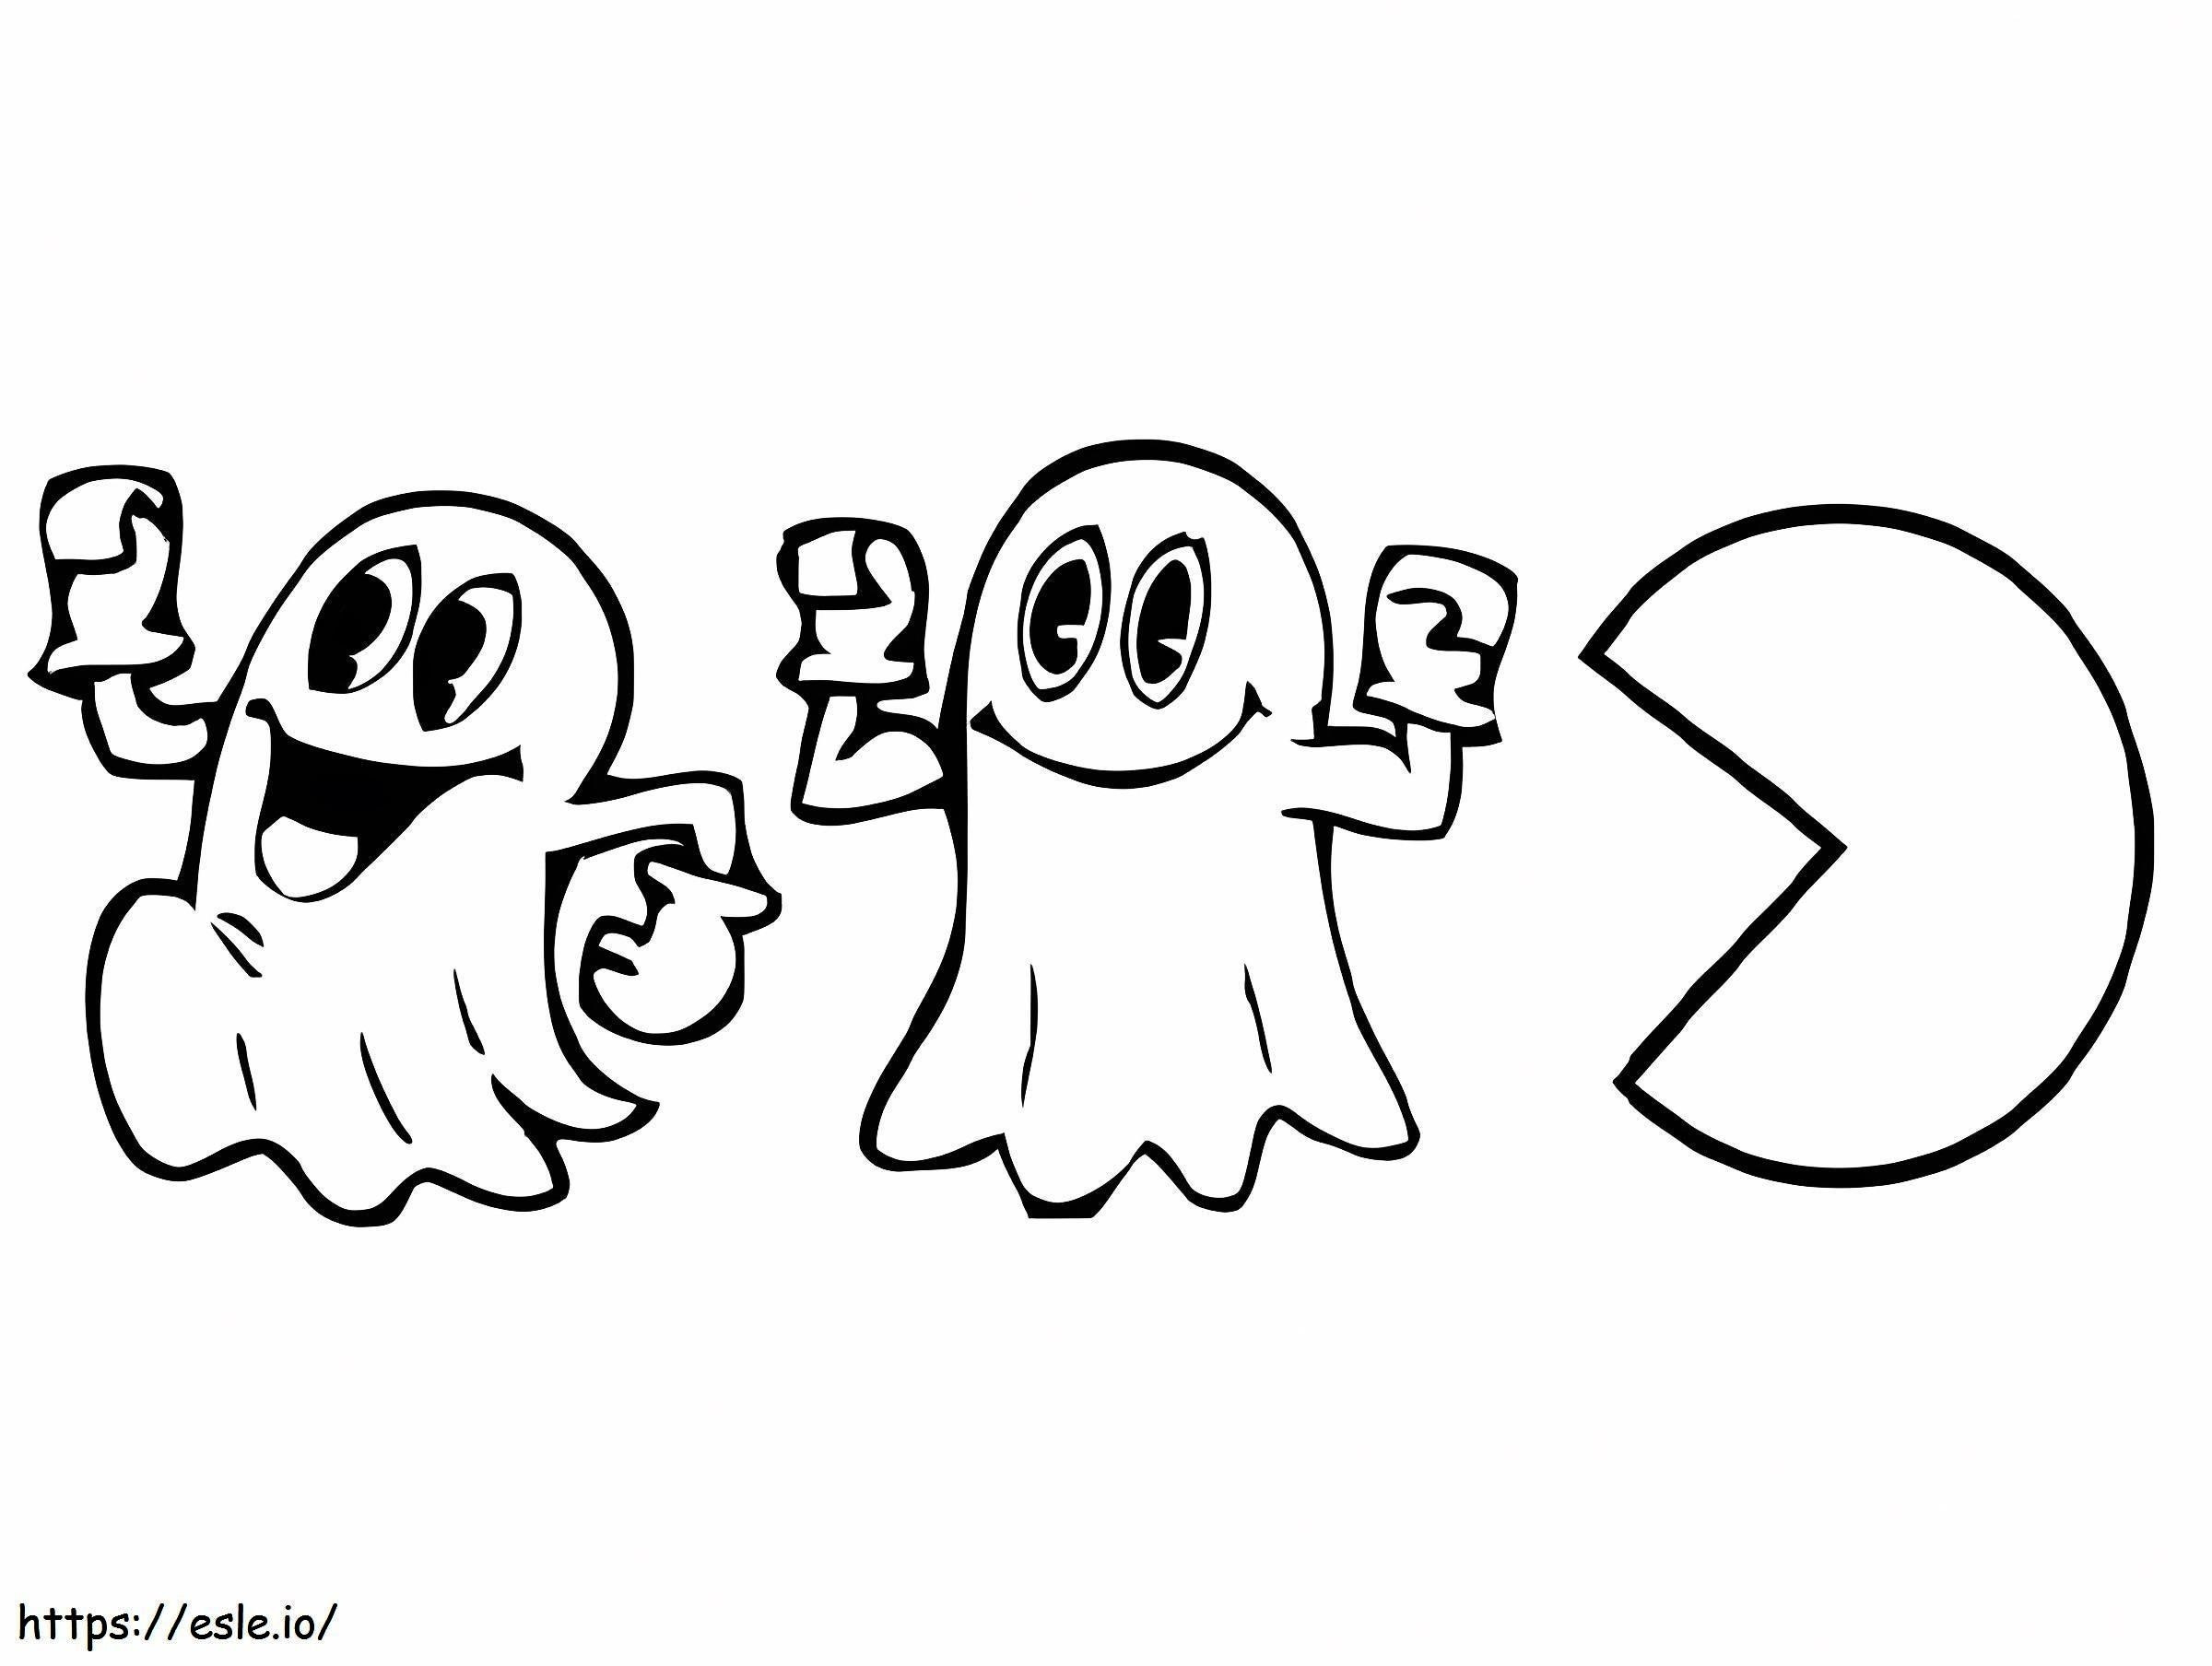 Pacman Eating Two Ghosts coloring page